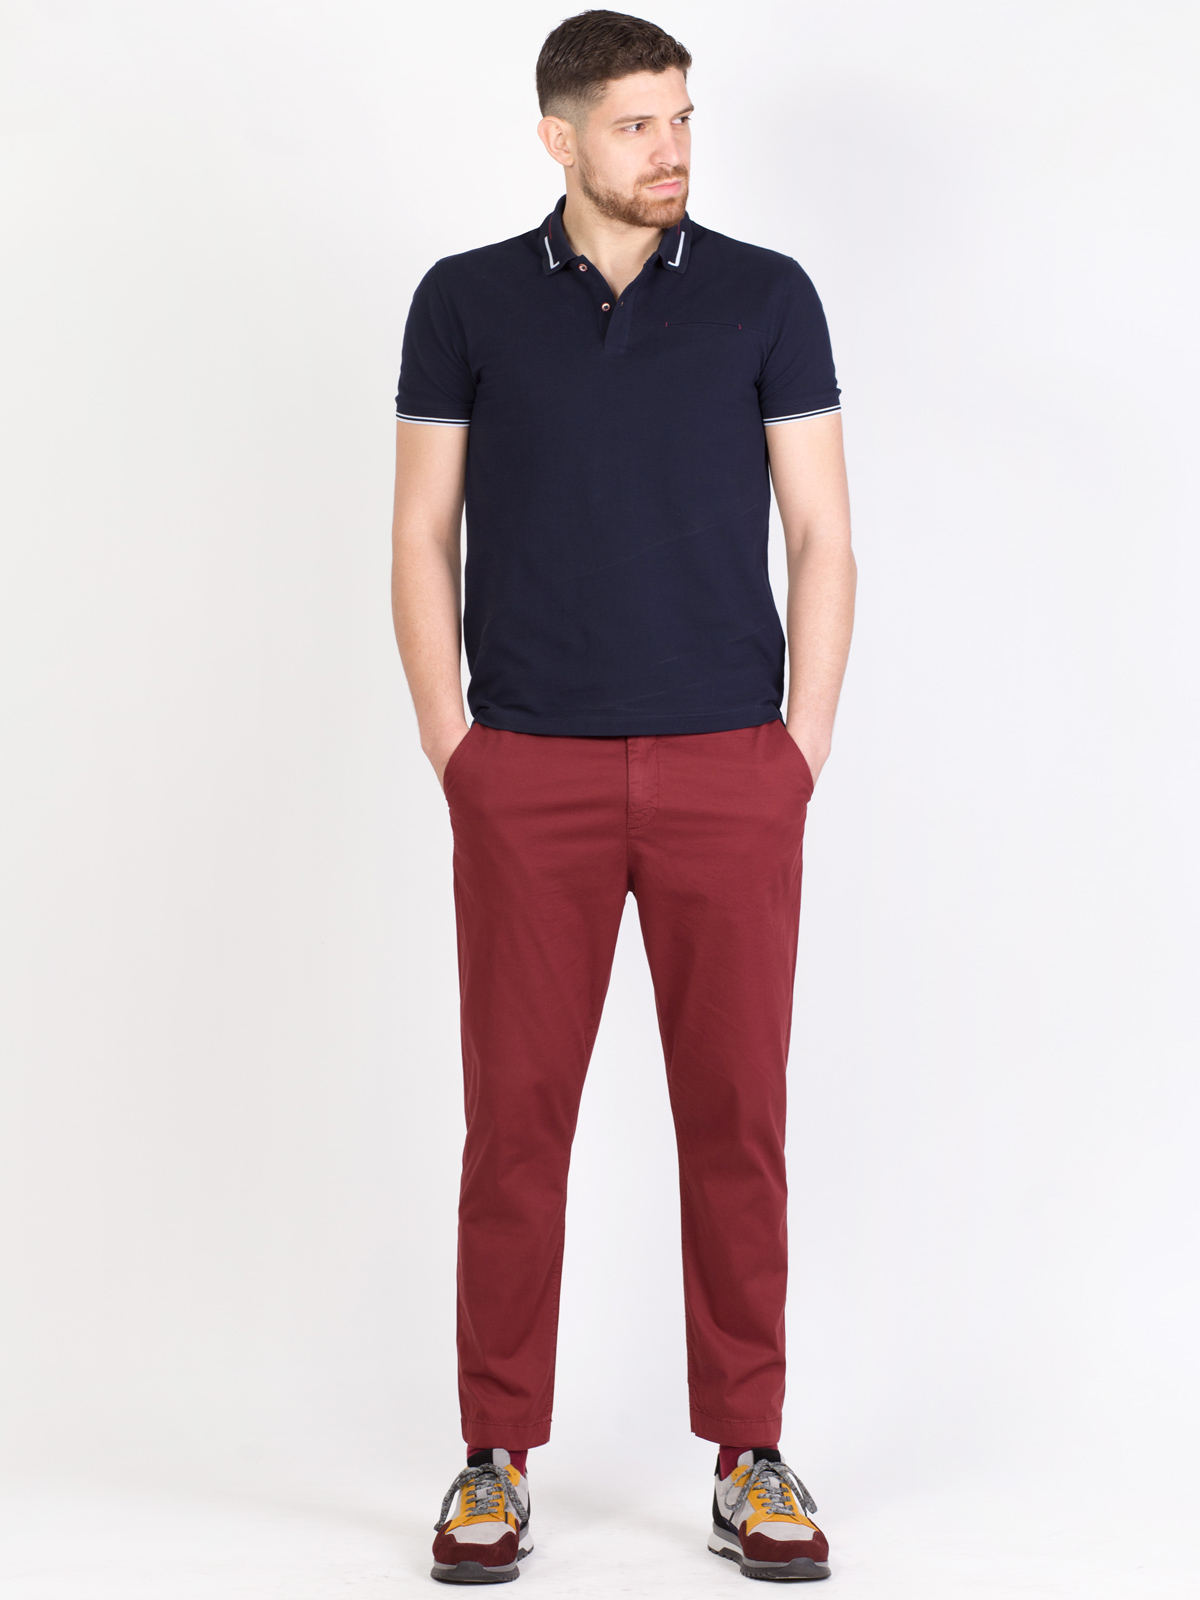 navy blue and burgundy | Burgundy pants, Burgundy pants outfit, Style